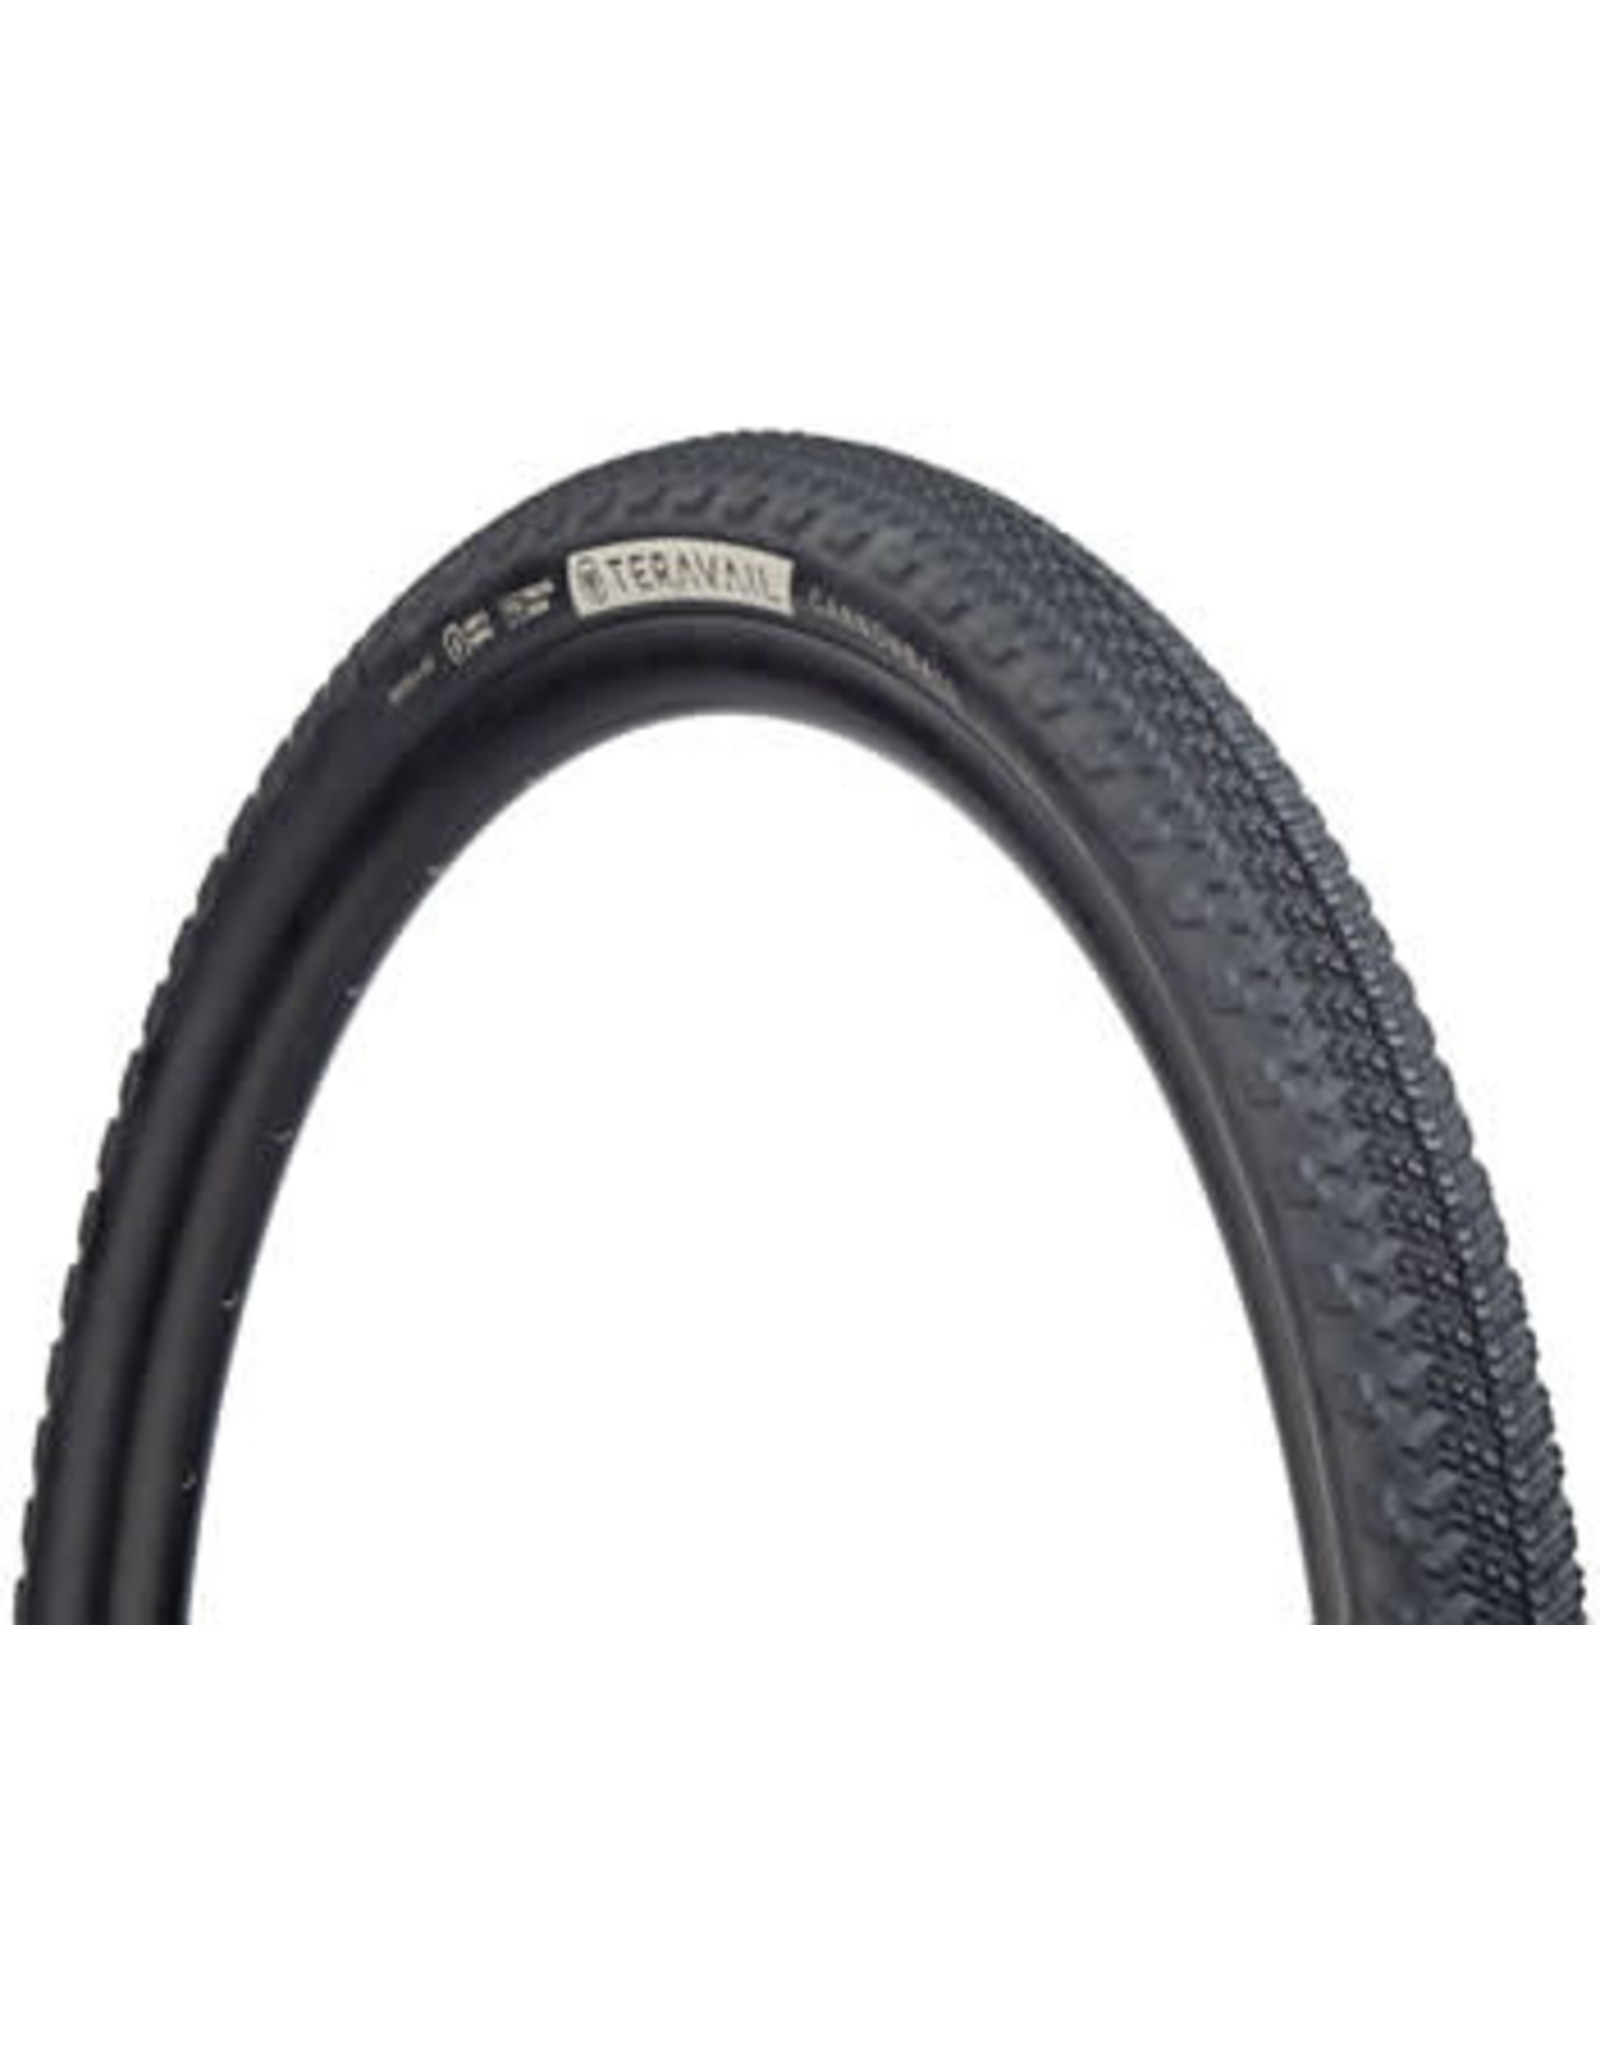 Teravail Teravail Cannonball Tire 650 x 47 Tubeless Folding Black Durable Fast Compound